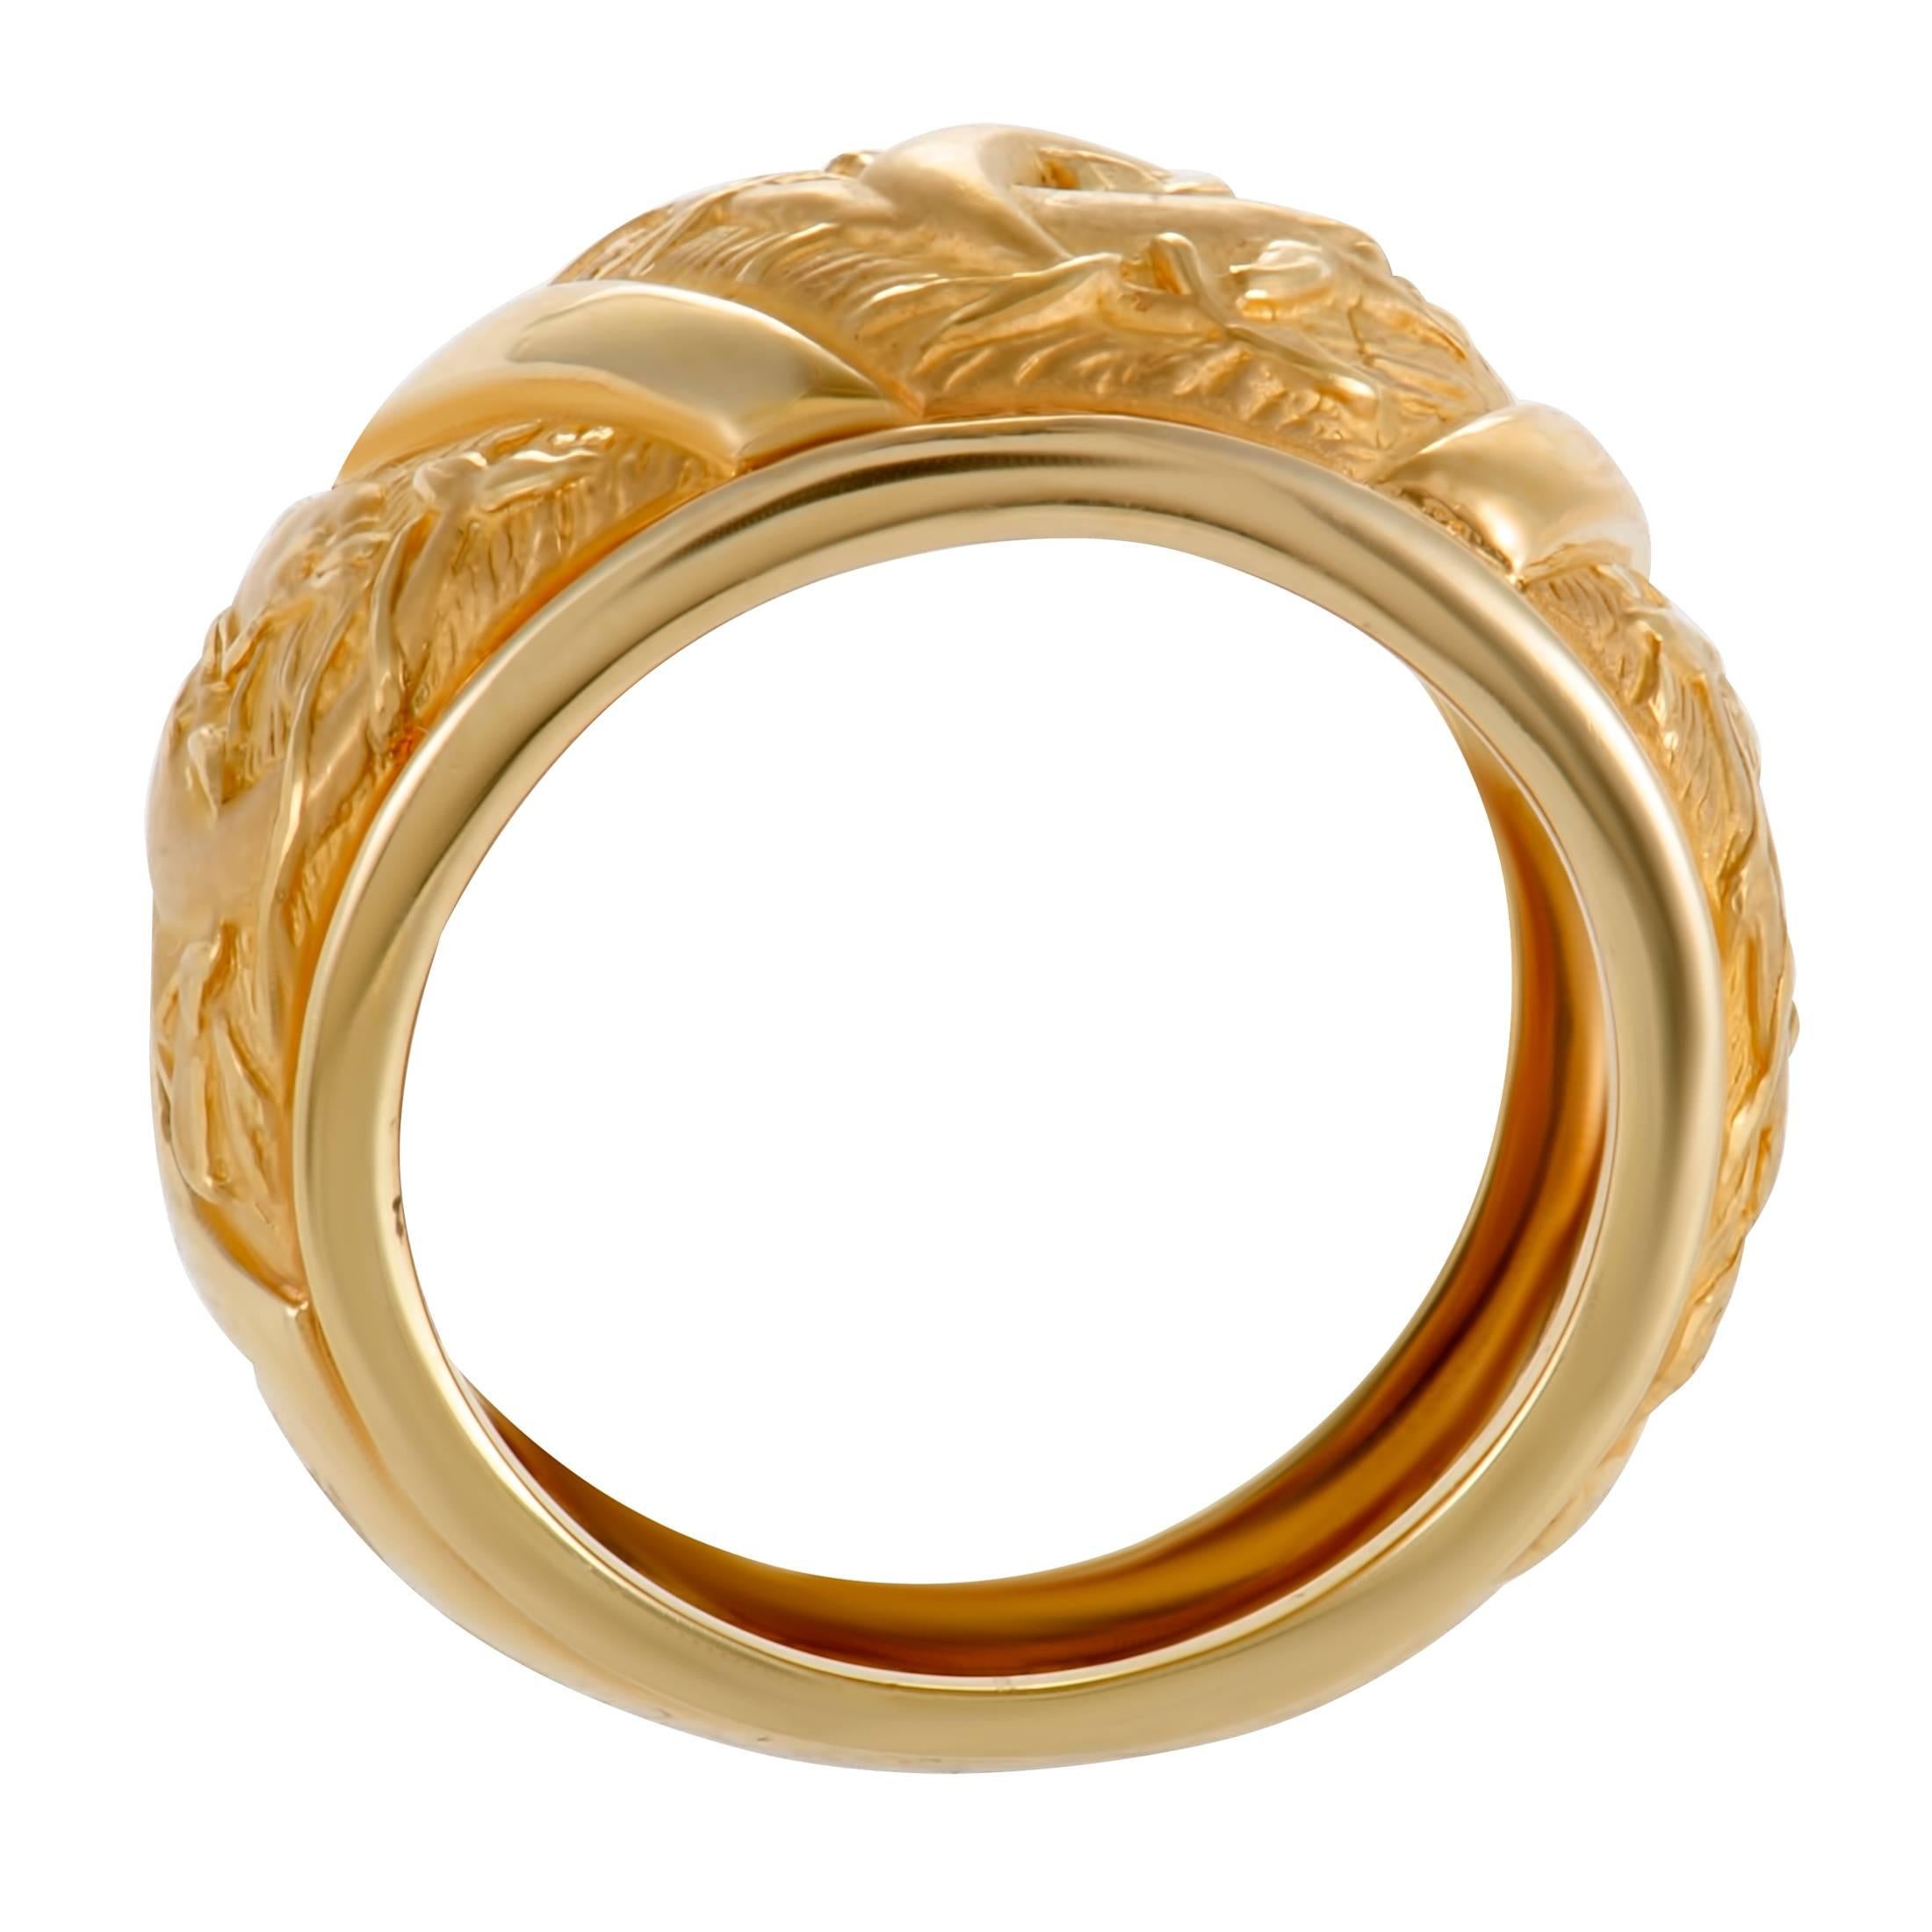 This beautifully splendid statement piece from Carrera y Carrera offers an exceptionally fashionable look and features a sensationally alluring style. The flawless dolphin band ring is exquisitely crafted from the ever-alluring 18K yellow gold. It